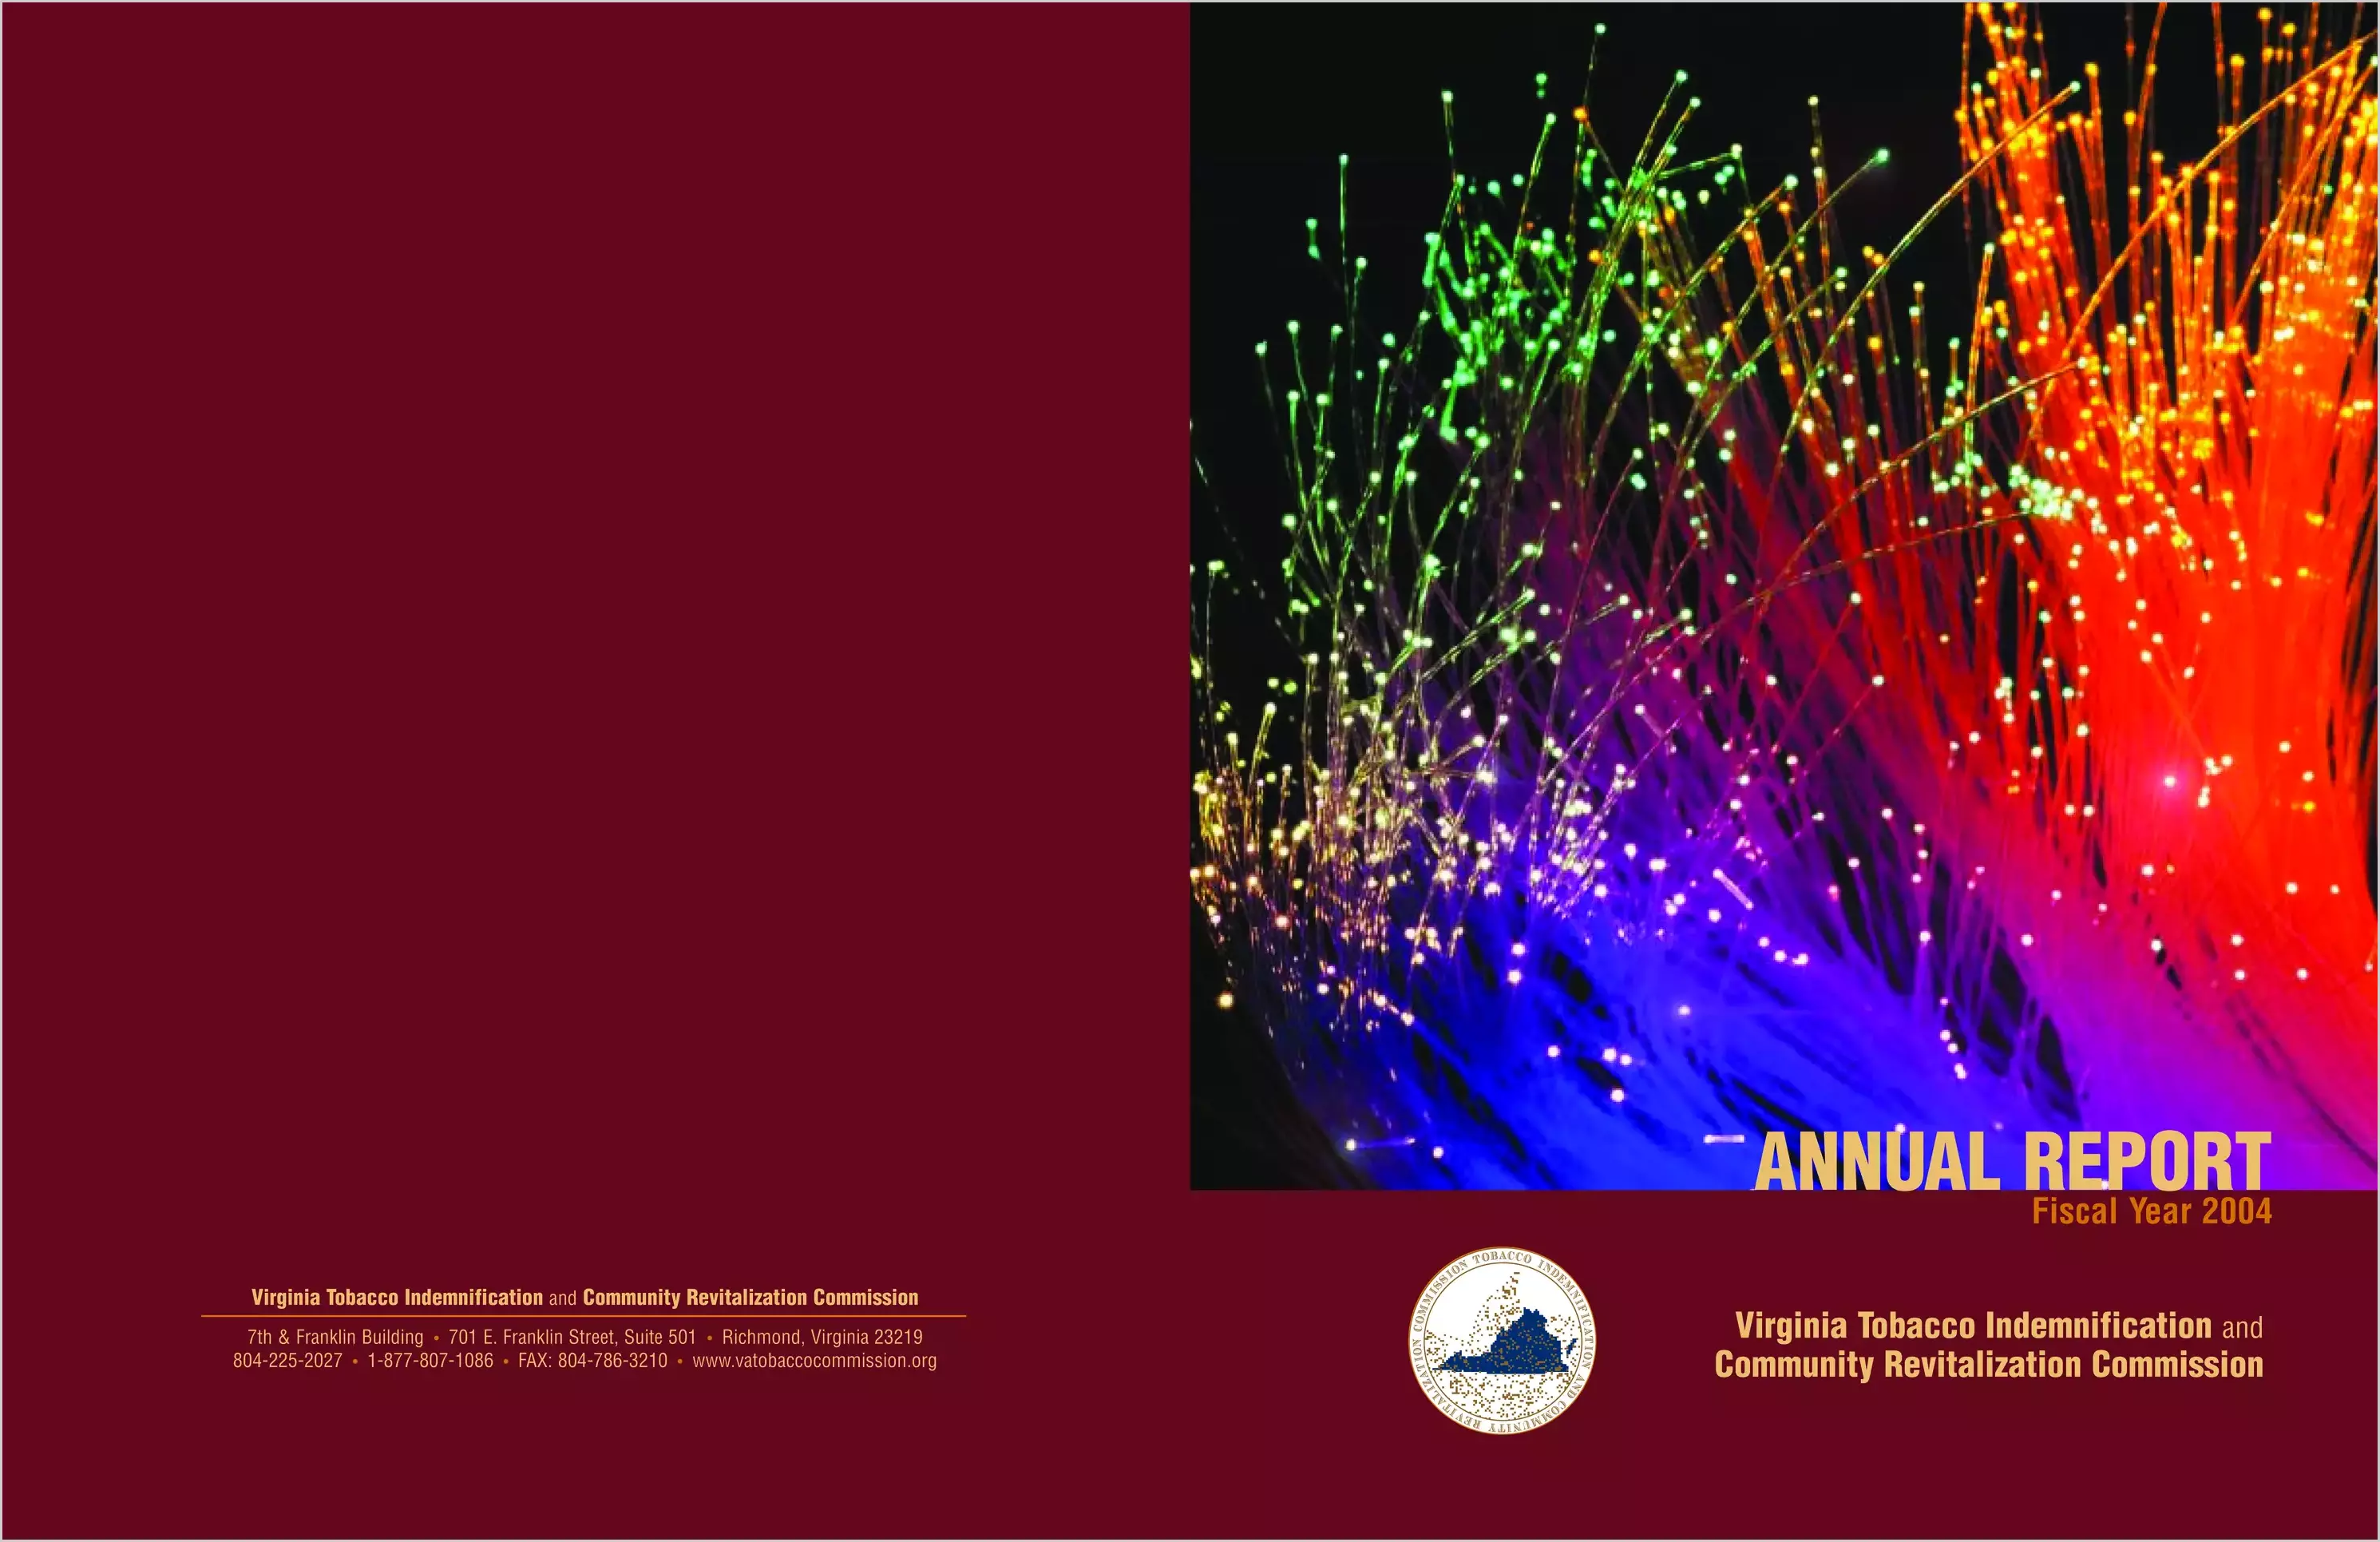 Tobacco Indemnification and Community Revitalization Commission Fiscal Year 2004 Annual Report